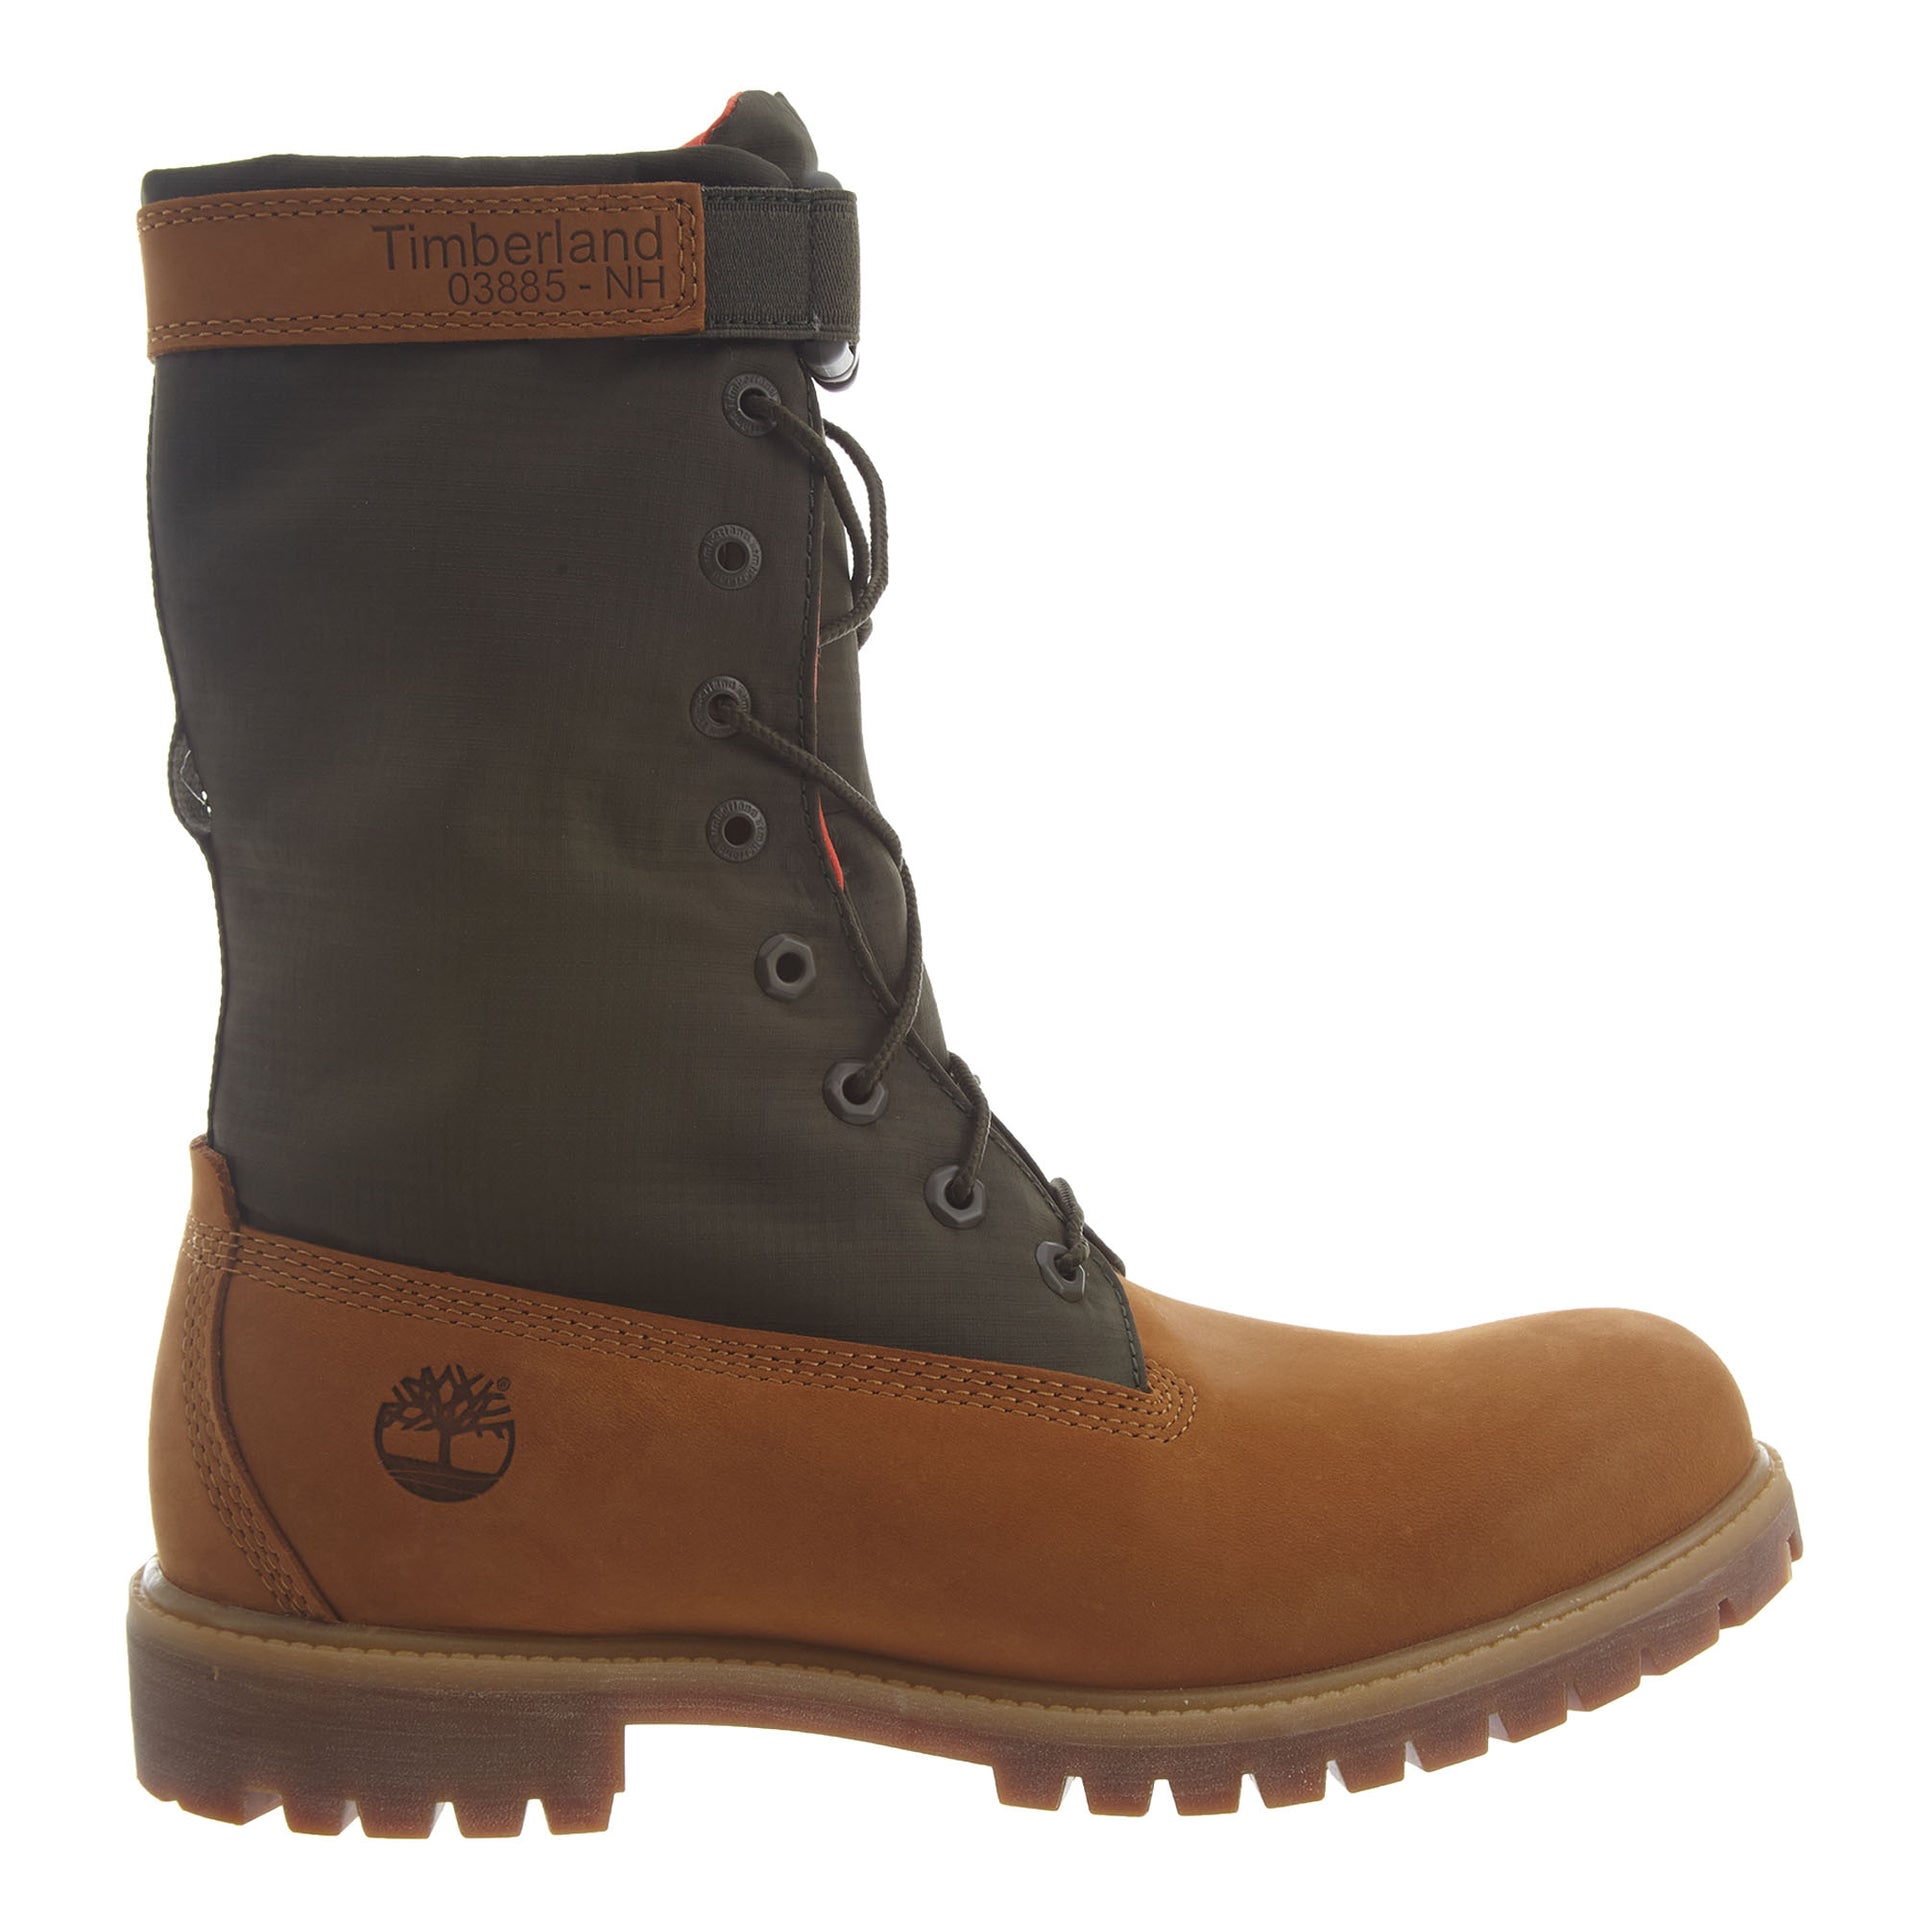 Timberland 6" Premium Gaiter Boot Mens Style : Tb0a1qy8-Wheat